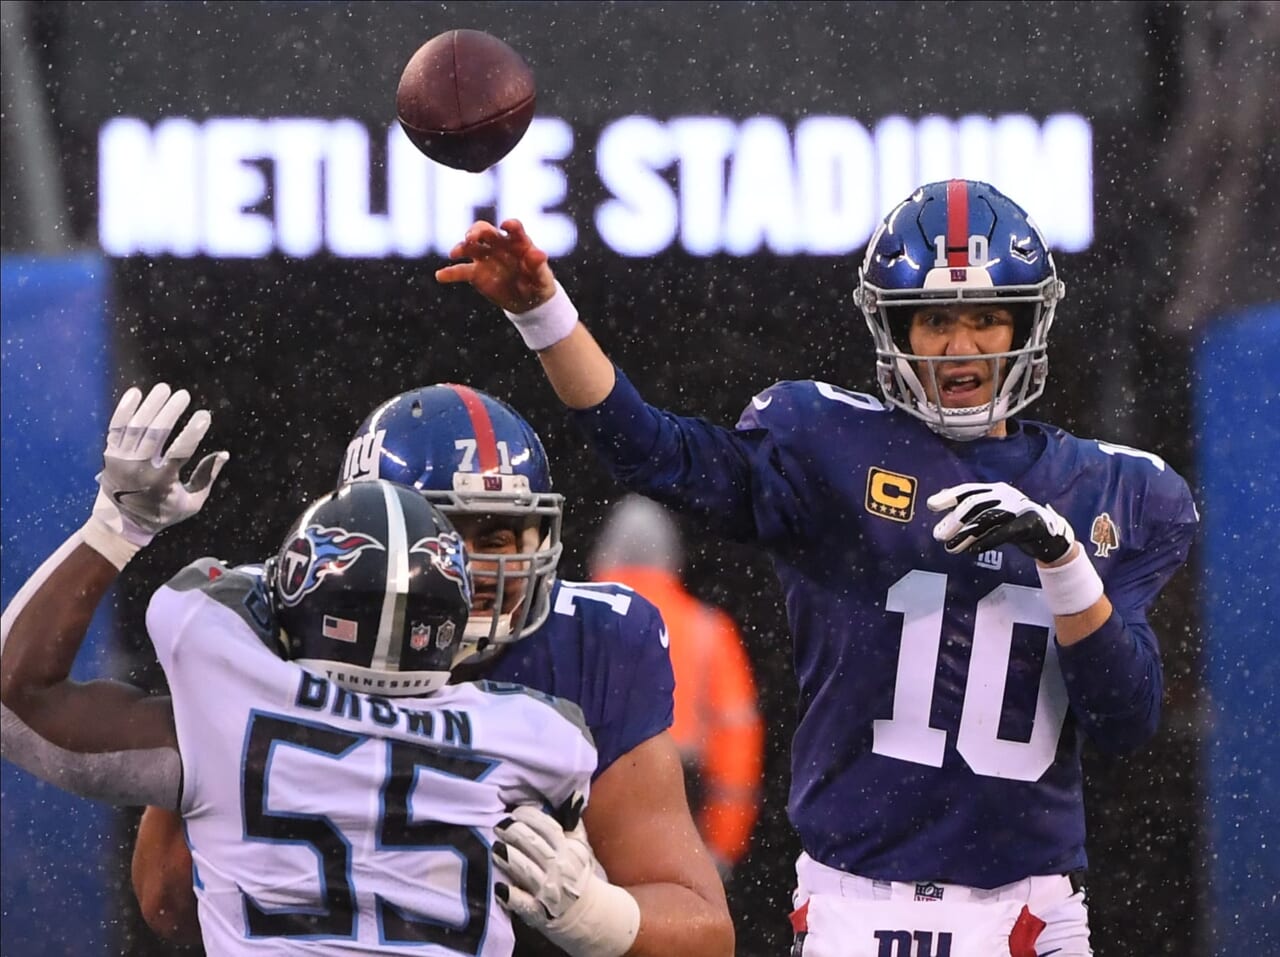 New York Giants: Is Eli Manning Overpaid? Bleacher Report Says Yes.